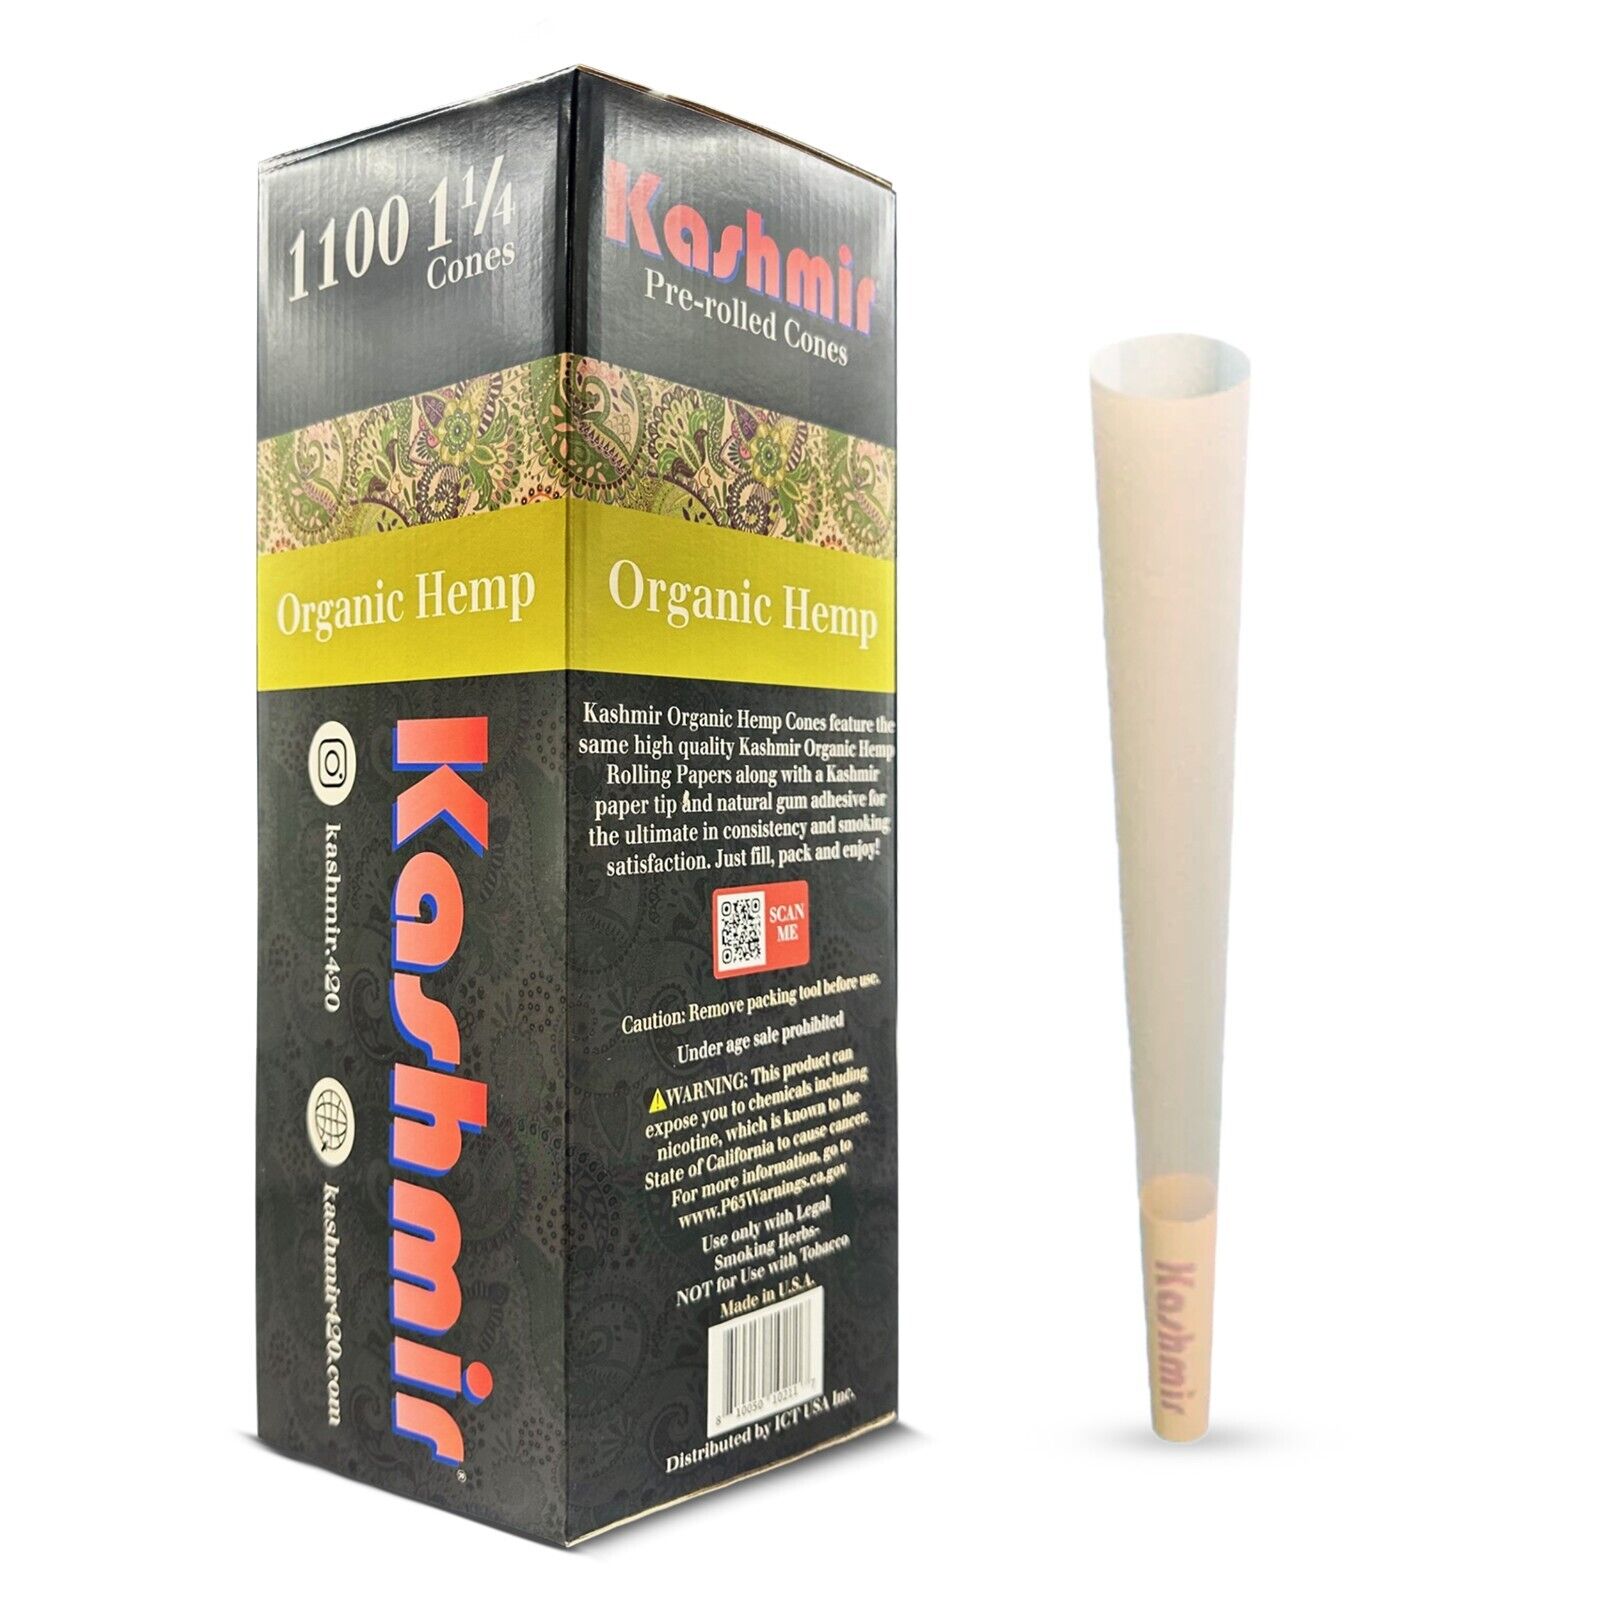 Kashmir Pre Rolled Cones 1 1/4 Bulk Organic Slow-Burning Rolling Papers: 1100 Ct